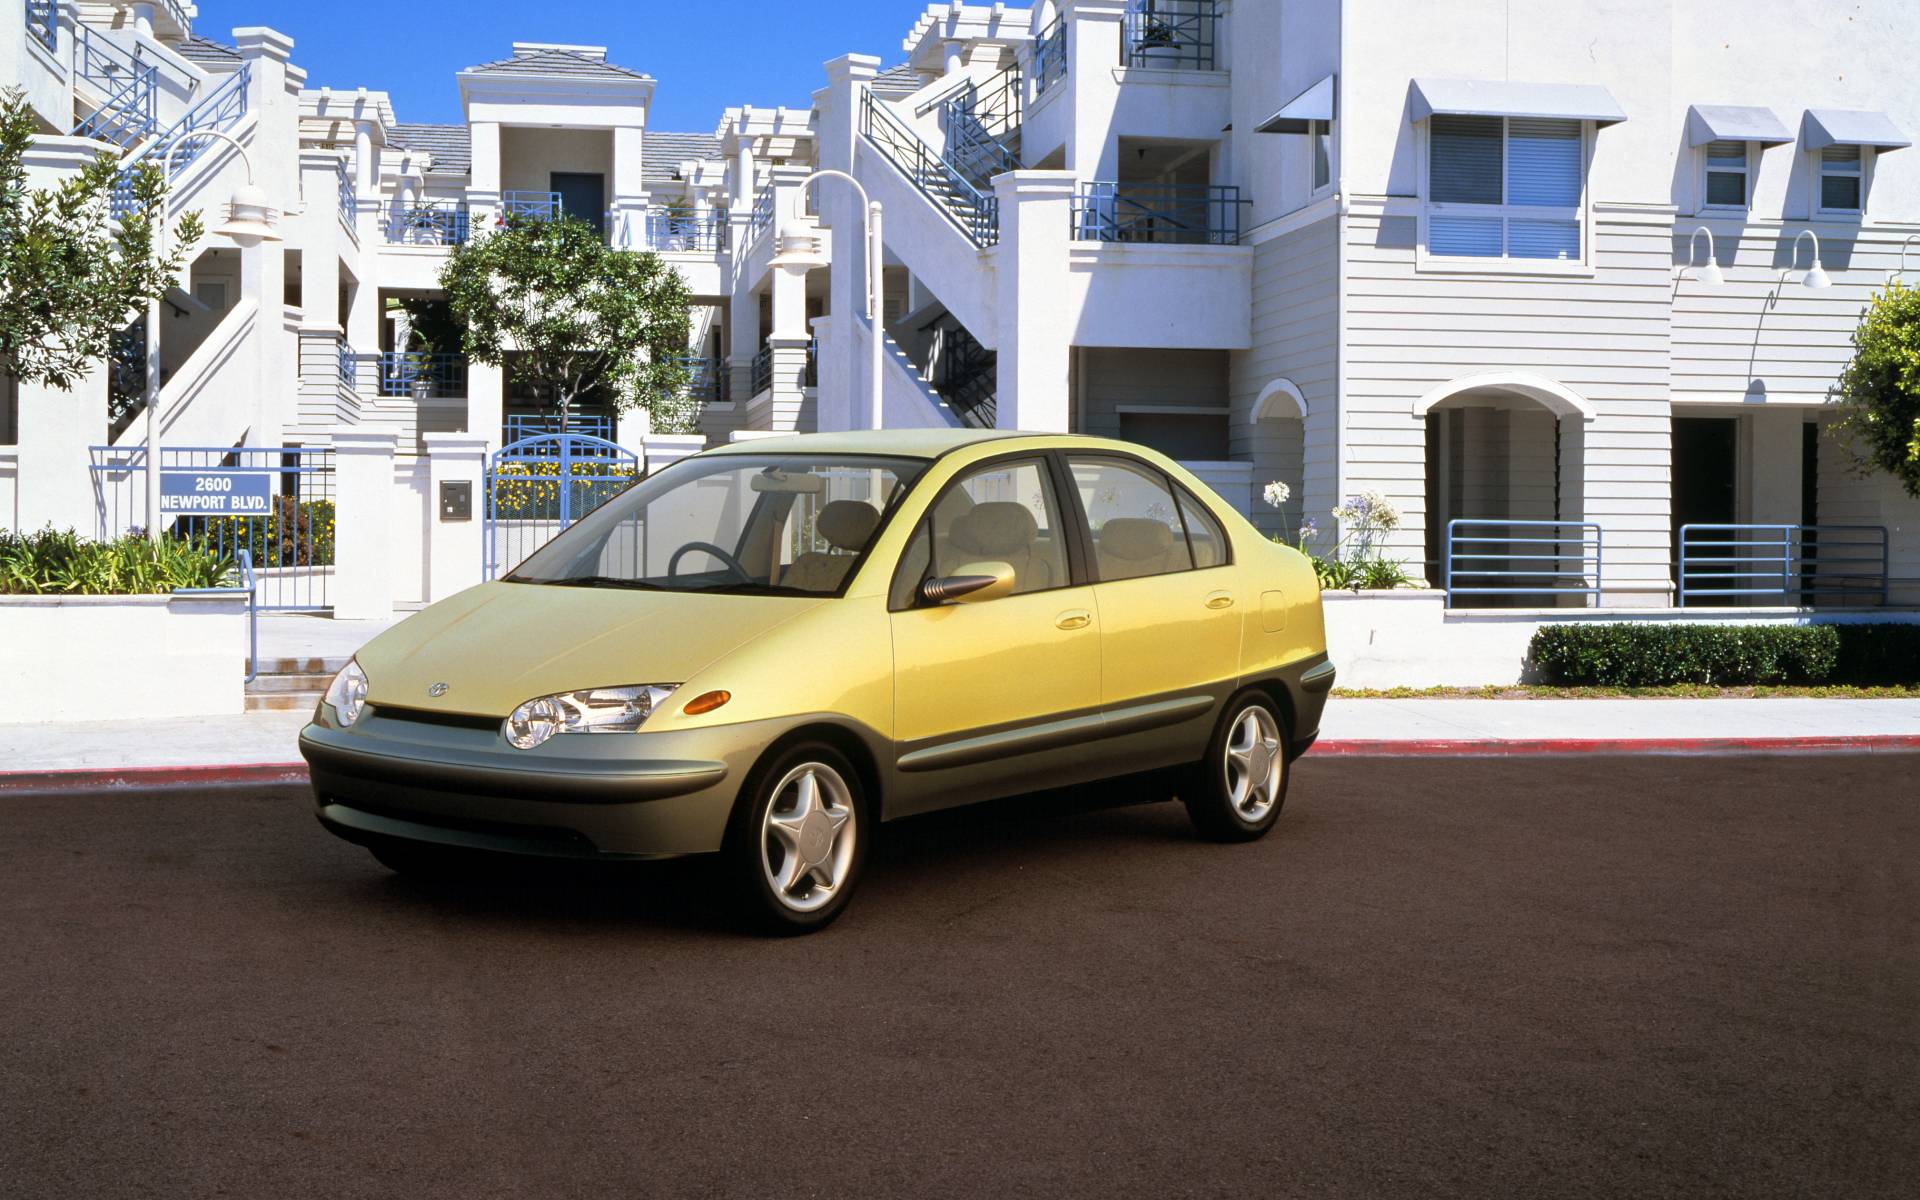 <p><strong>Toyota Prius Concept 1995</strong></p>